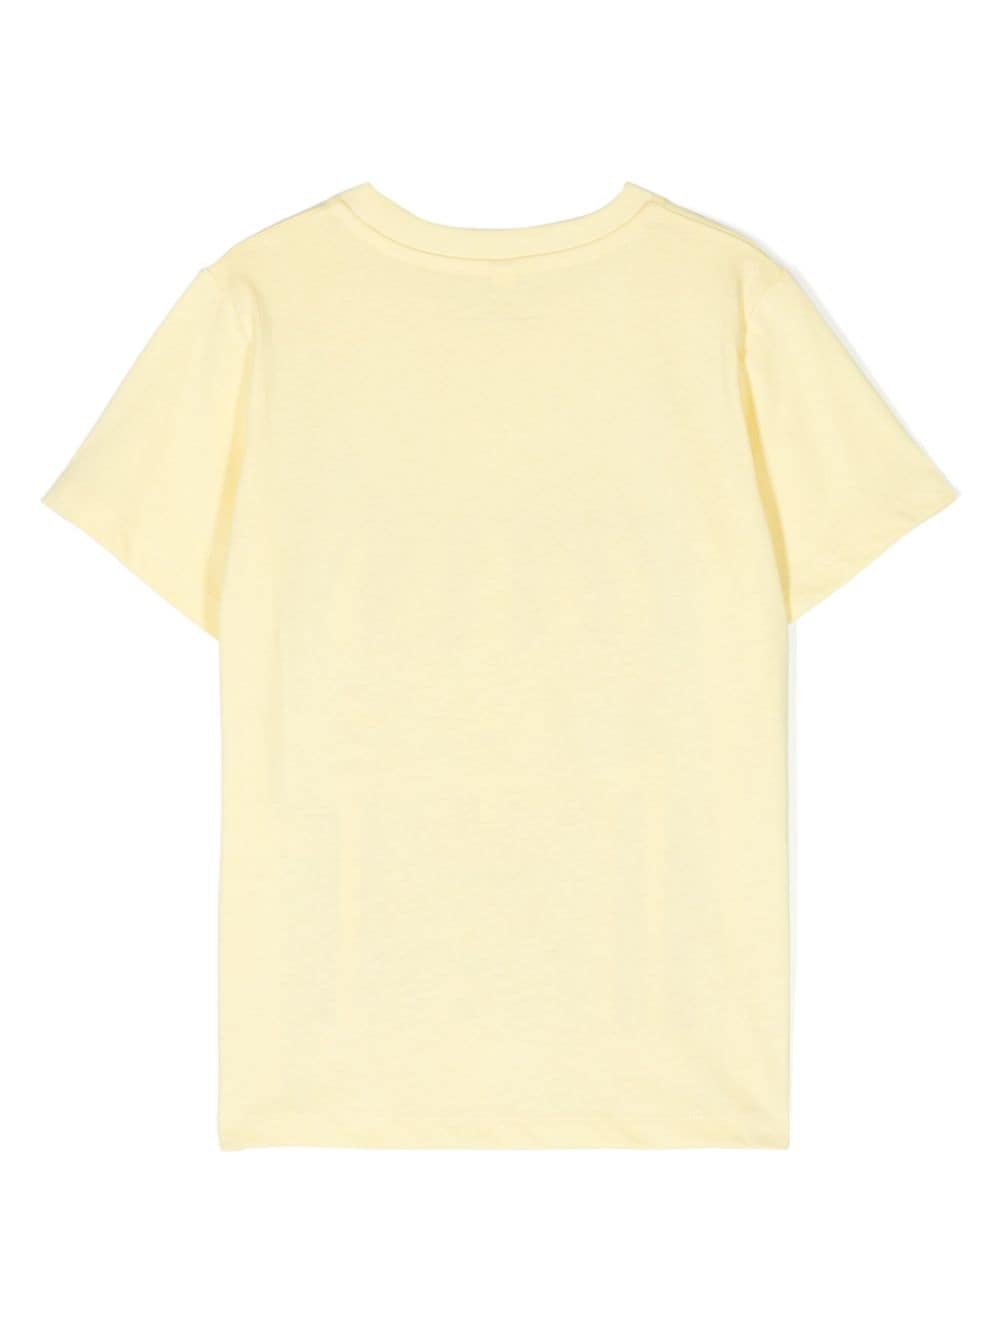 Yellow t-shirt for children with mold